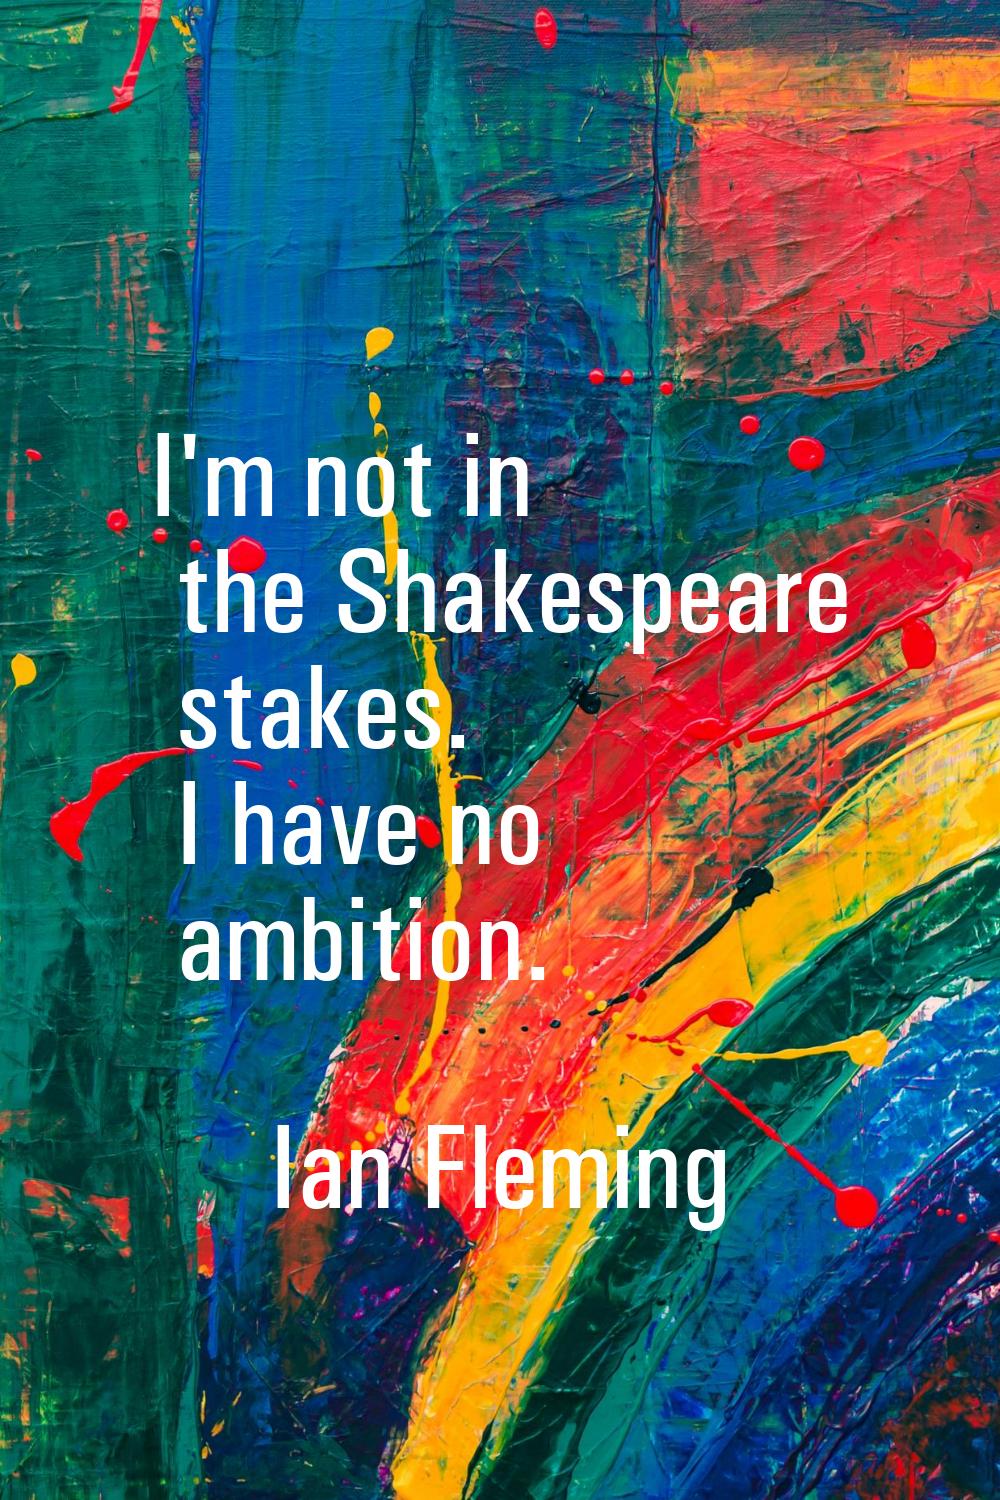 I'm not in the Shakespeare stakes. I have no ambition.